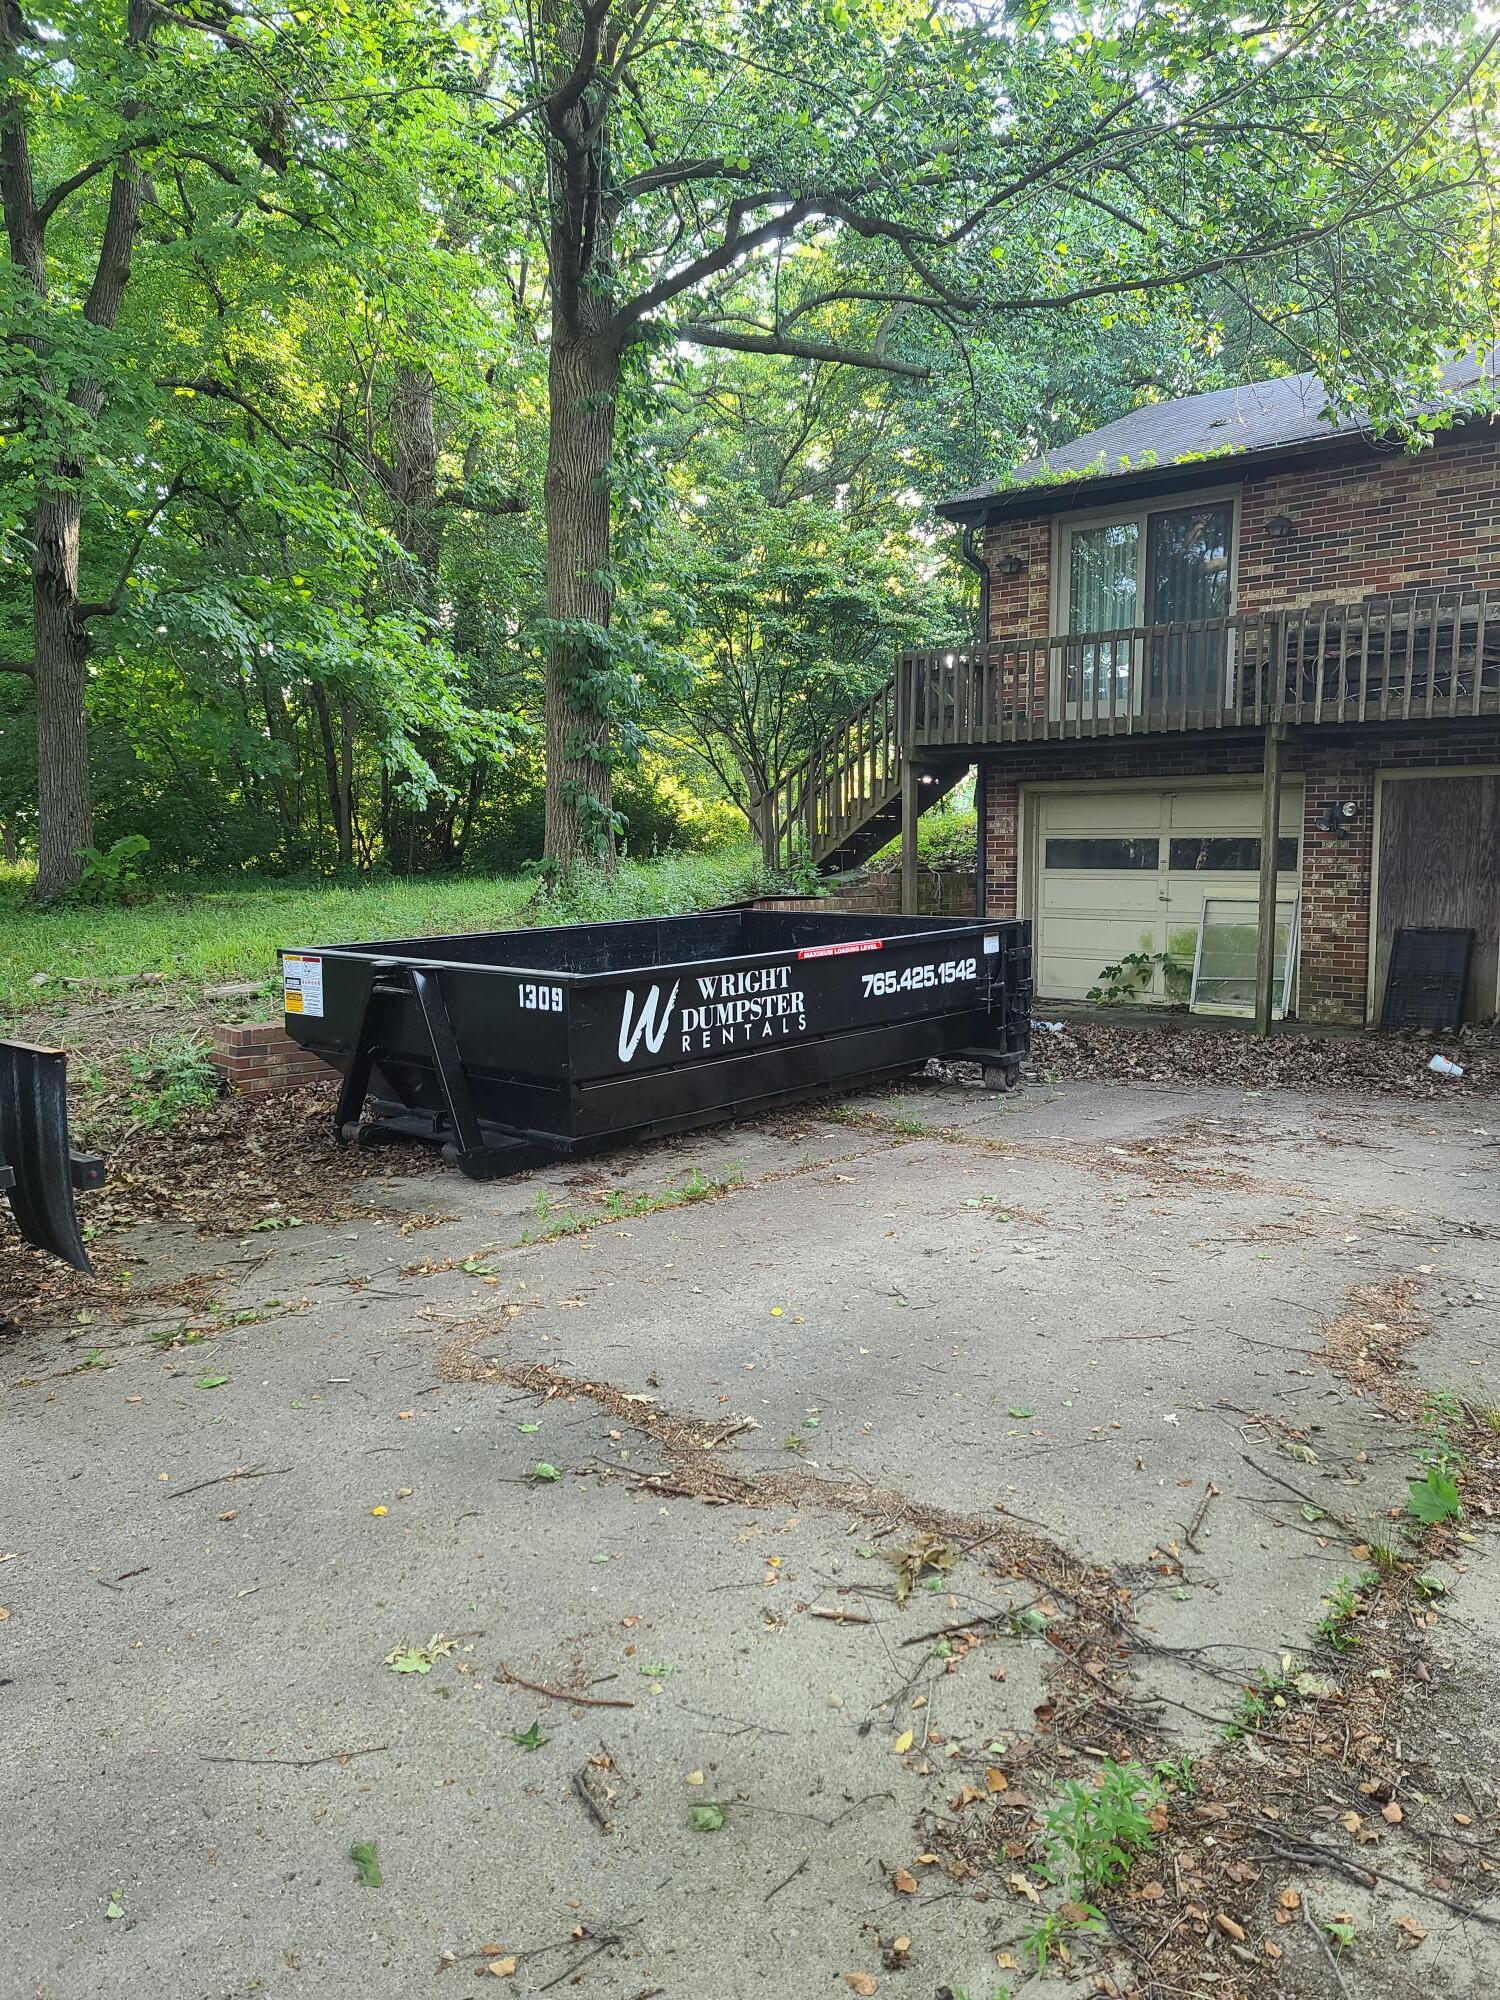 15 yard dumpster in driveway, reliable dumpster rental services, muncie, madison county in, wright dumpster rentals